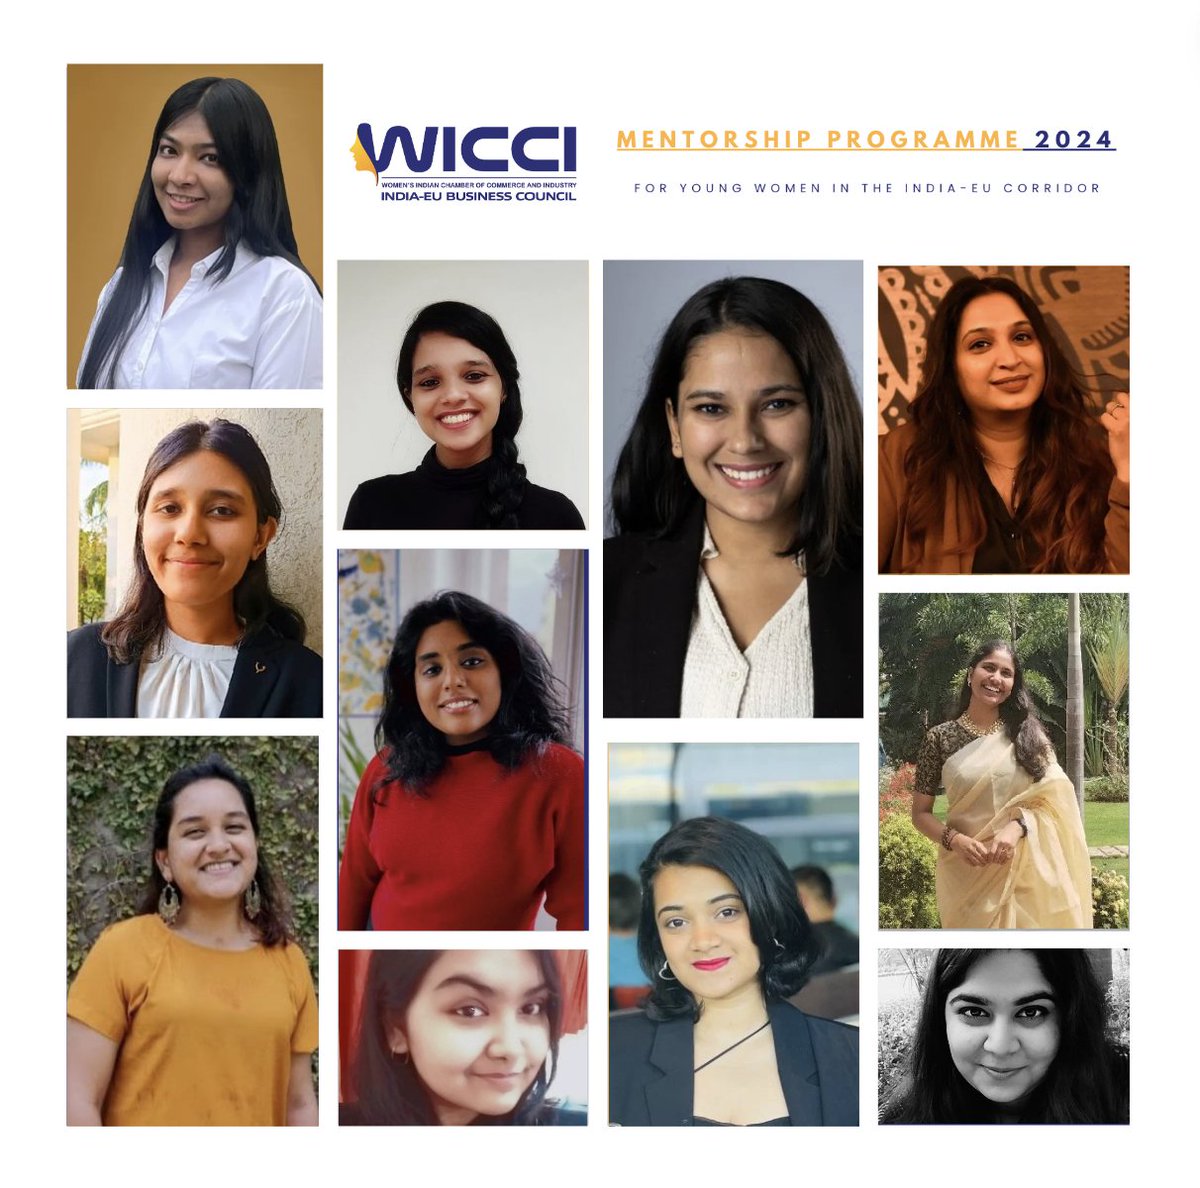 We are happy to introduce the talented mentees who are part of our 2nd edition of the Mentorship Programme 🚀 linkedin.com/feed/update/ur… #EUIndia #IndiaEUBinder #womeninbusiness #womenempowerment #womeninspiringwomen #wicci #mentorship #mentorshipprogramme #indiaeuwomen